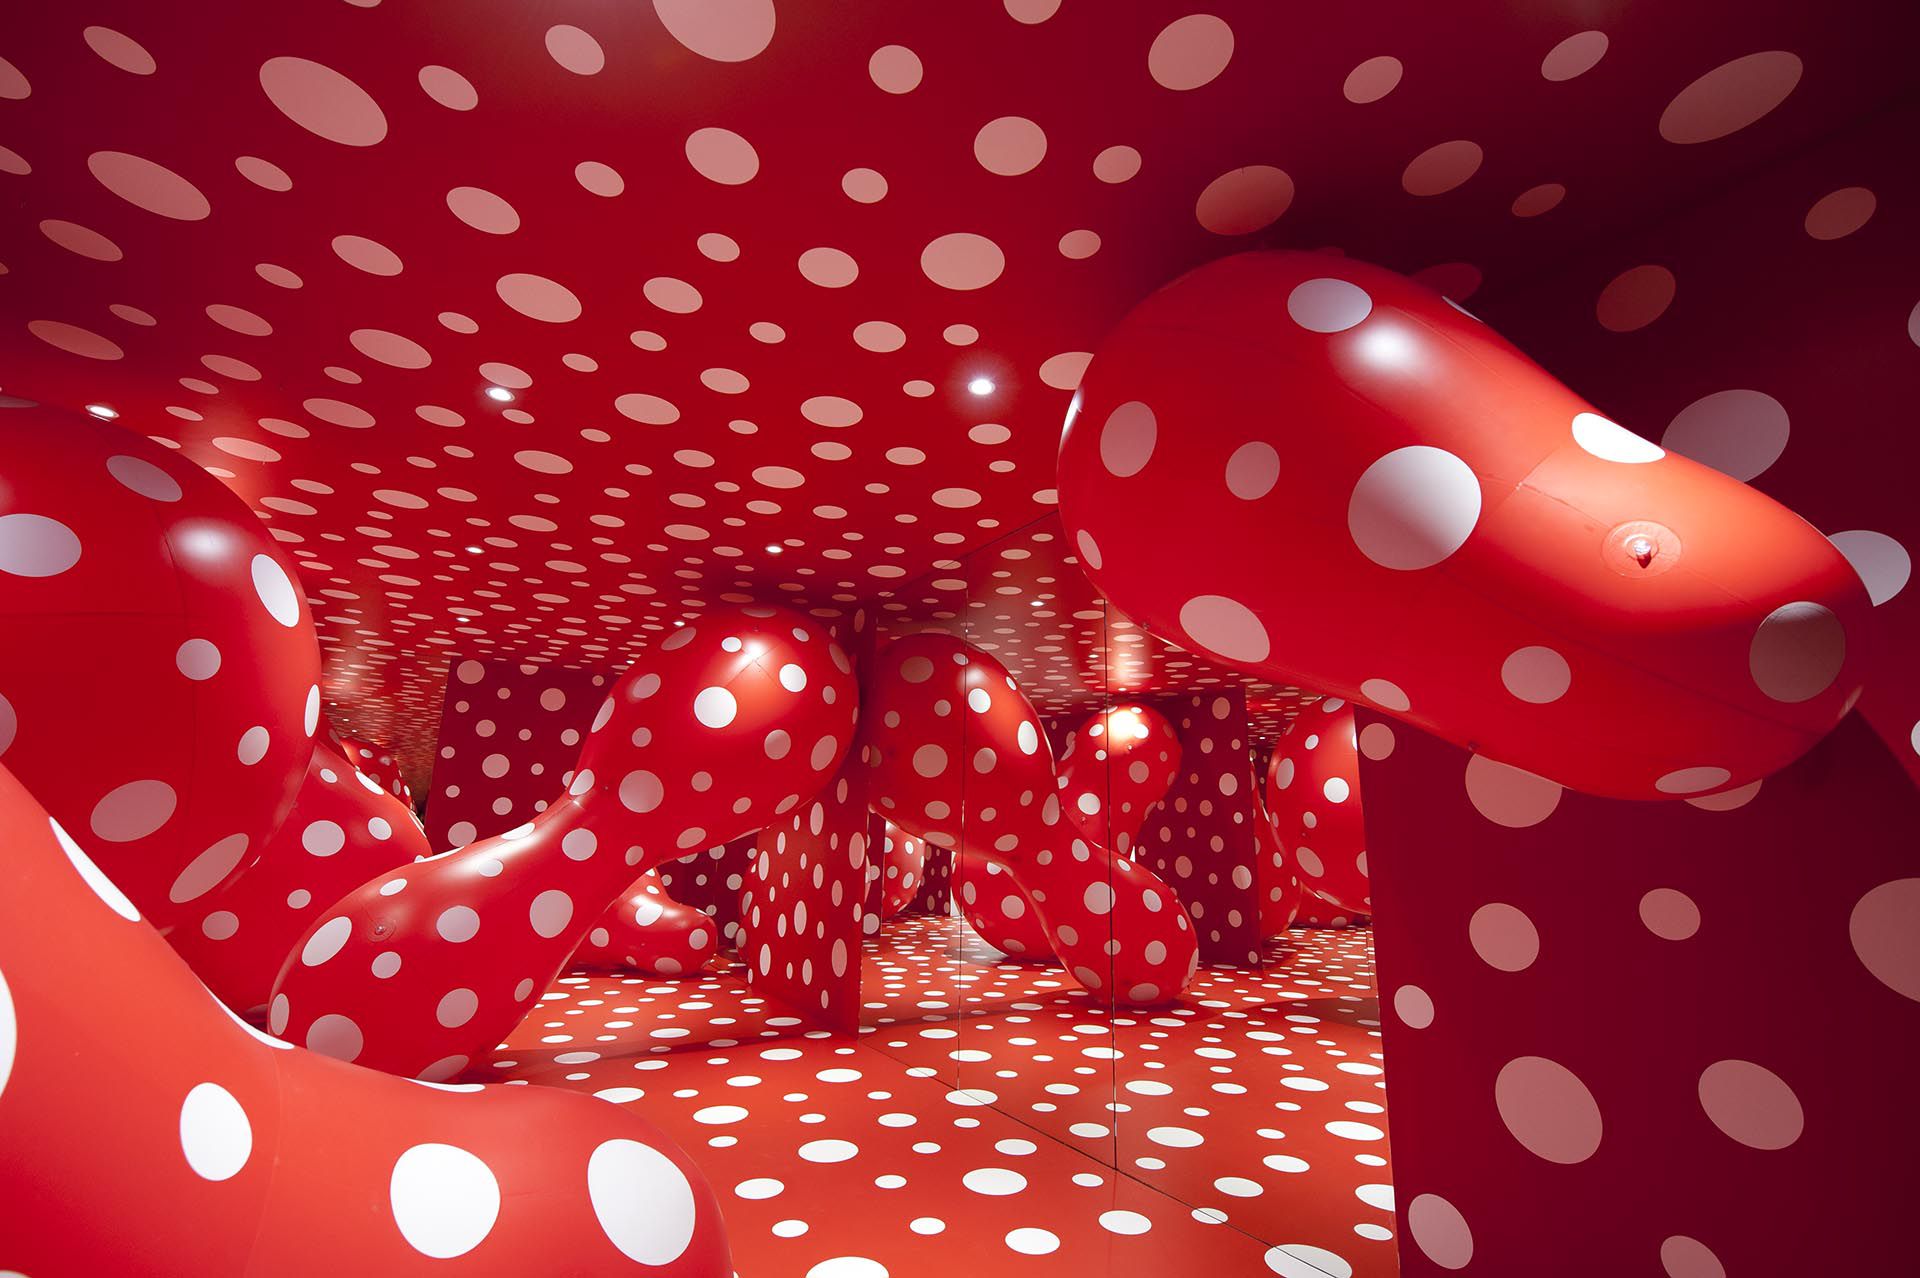 'Yayoi Kusama: Look Now, See Forever' Installation view